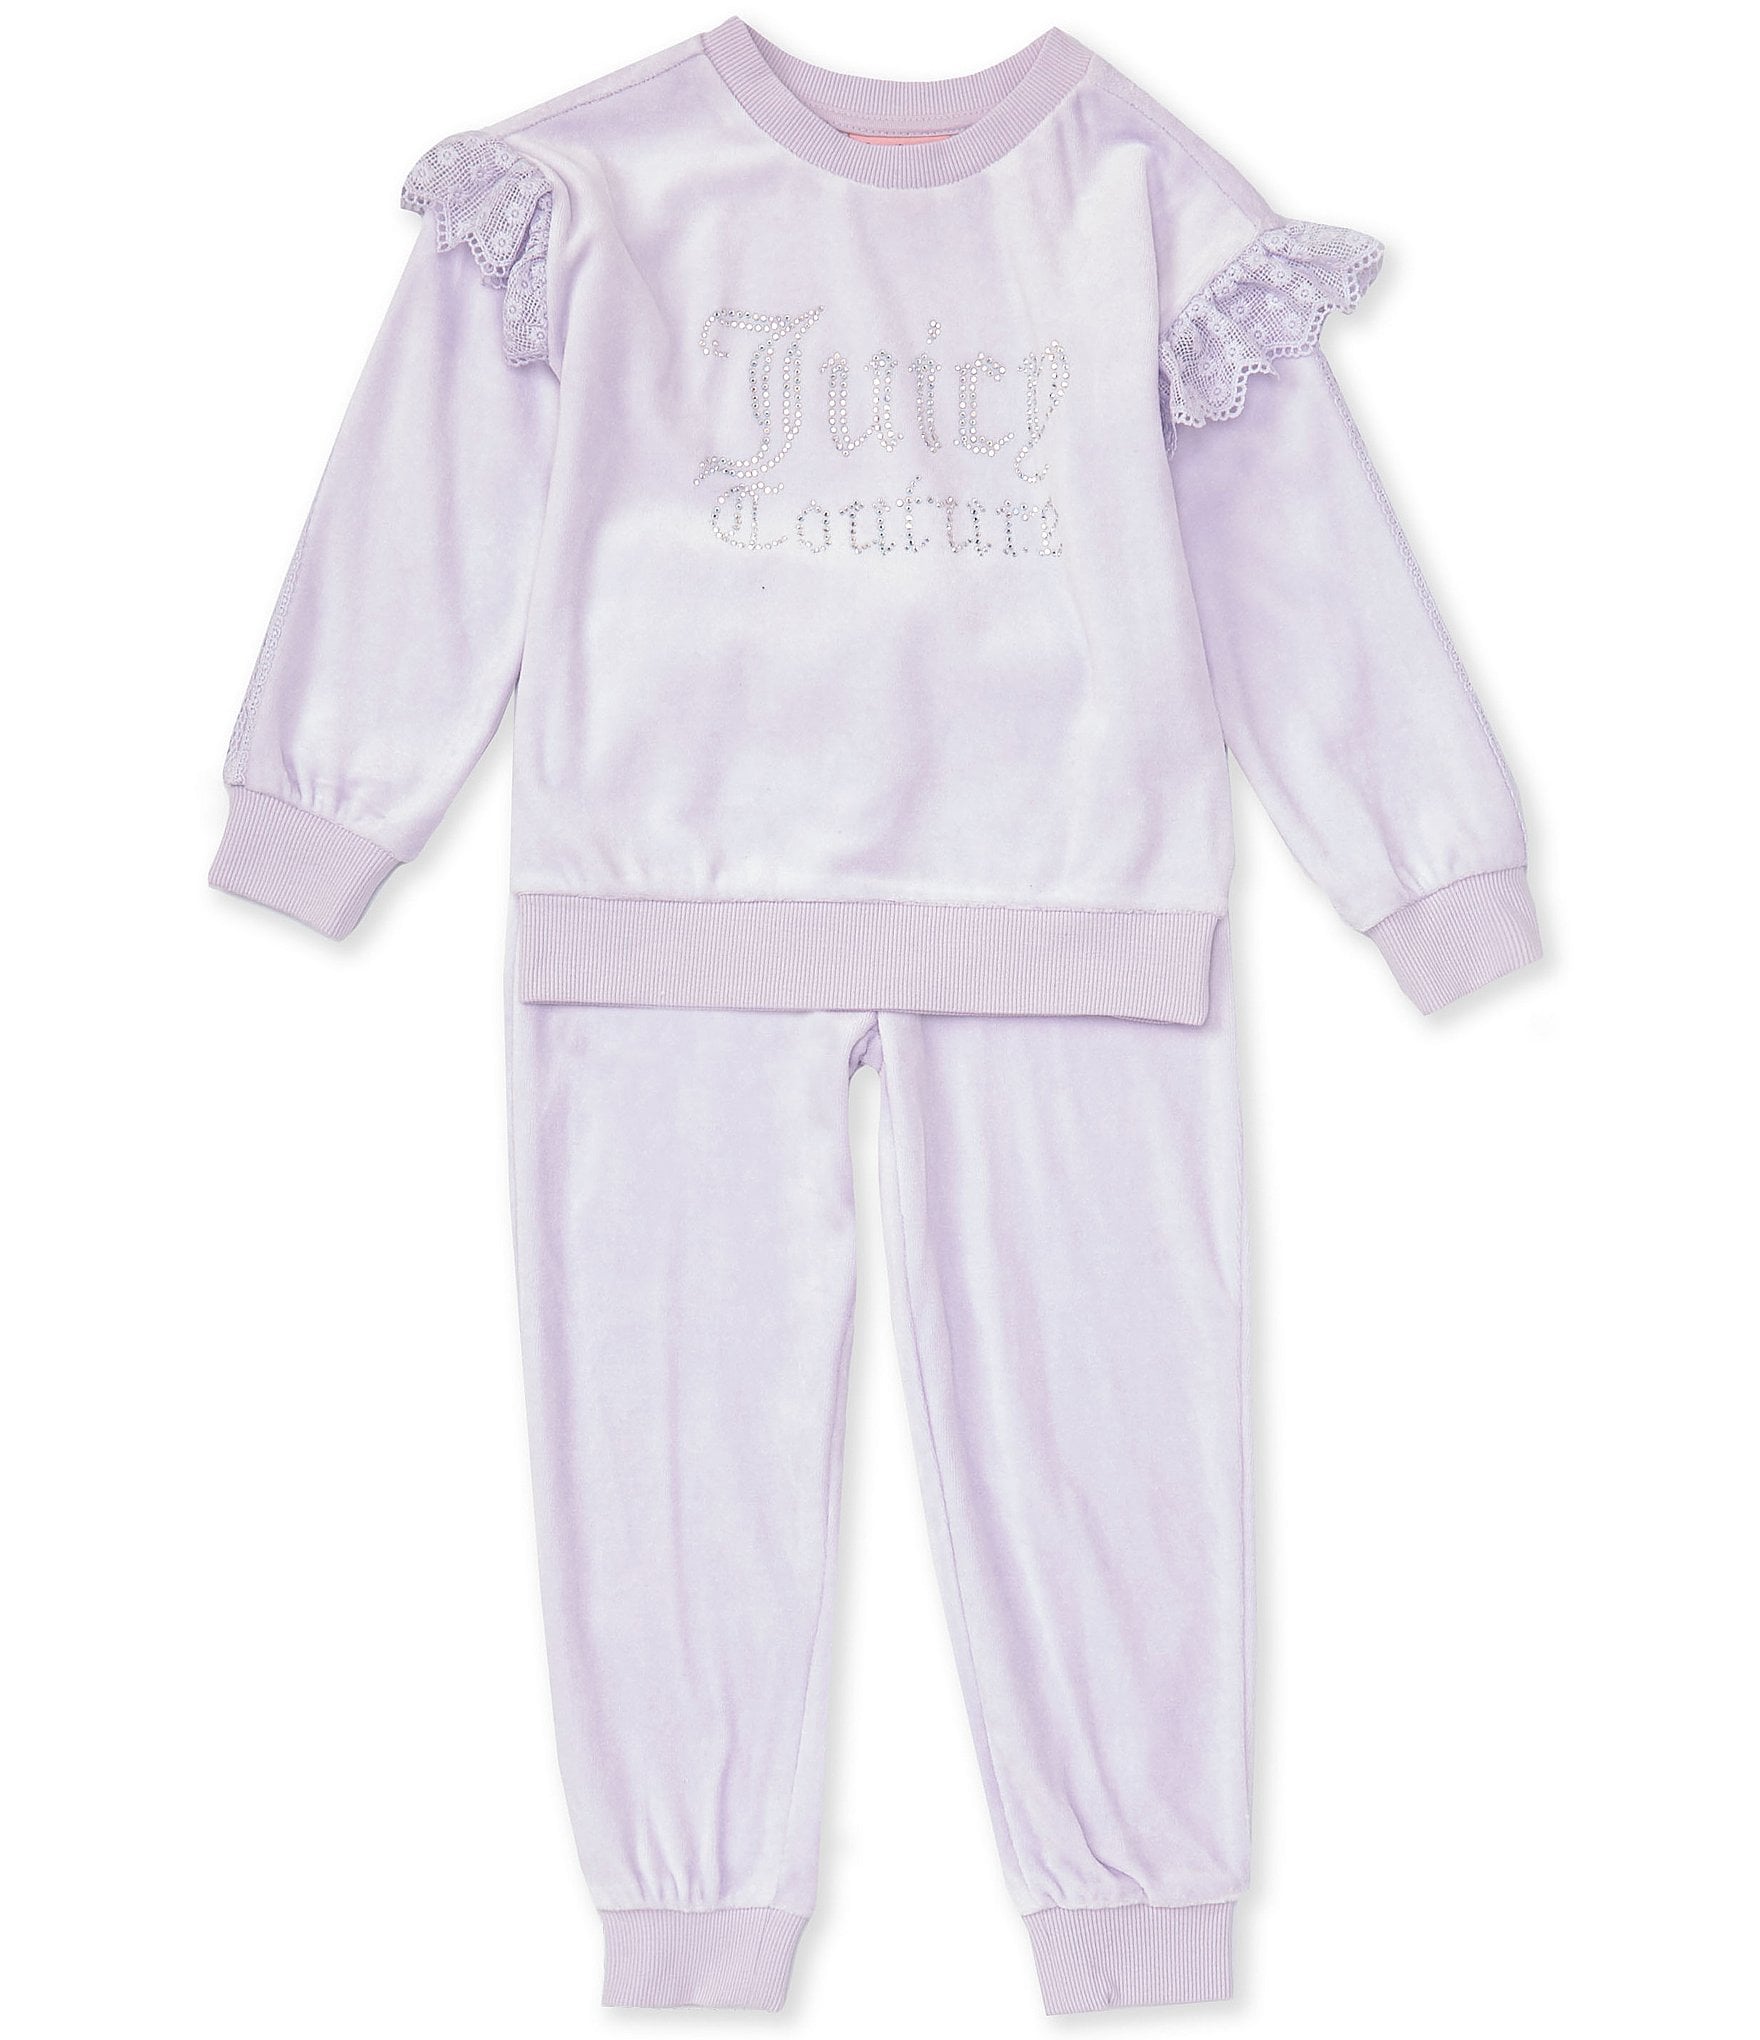 NWT Juicy Couture Girls 2 Pieces Legging Set Size 6-9 Months